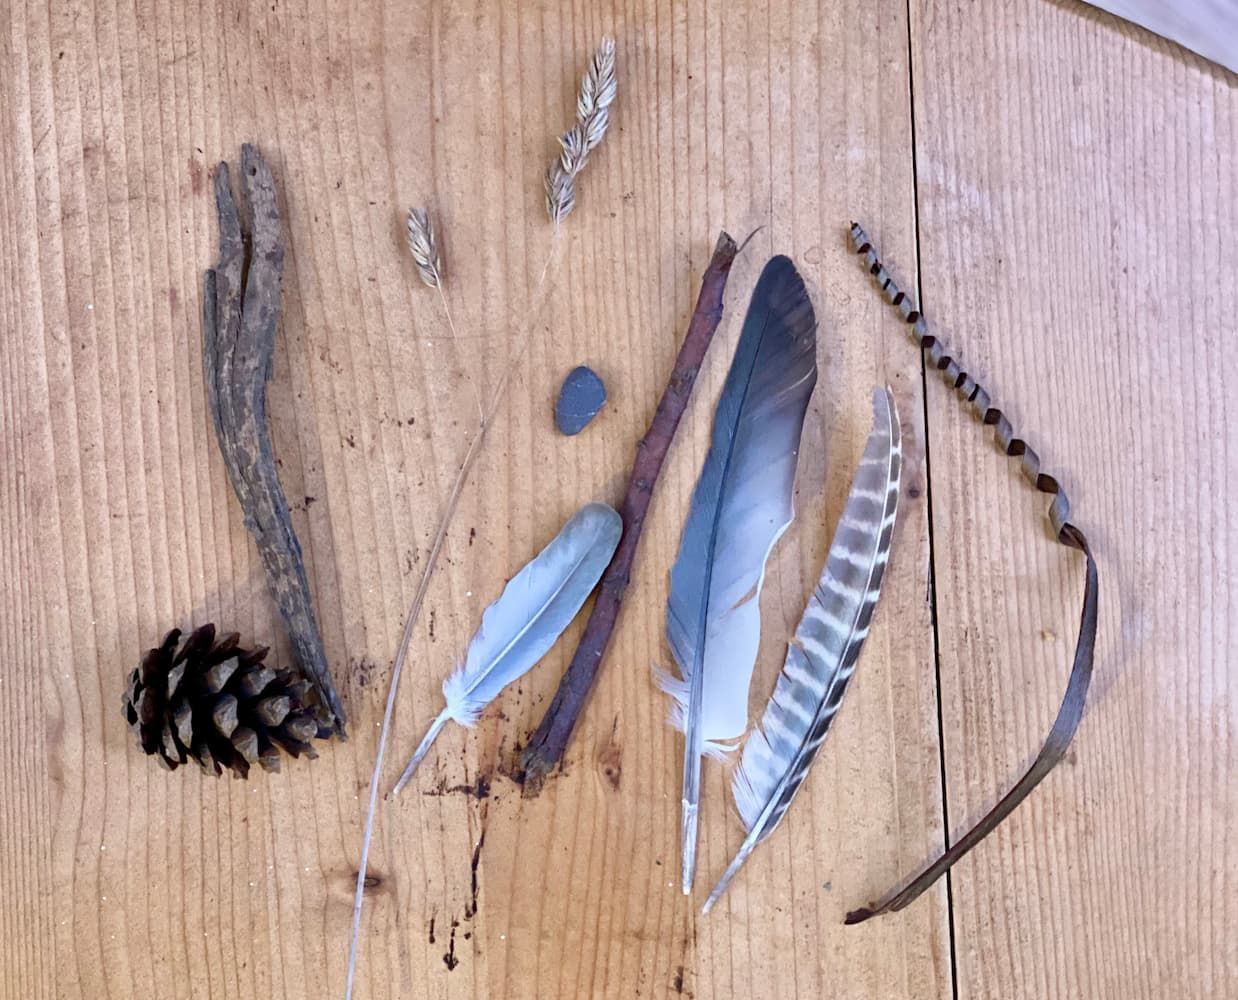 Feathers, twigs and bark collected for an “invention”